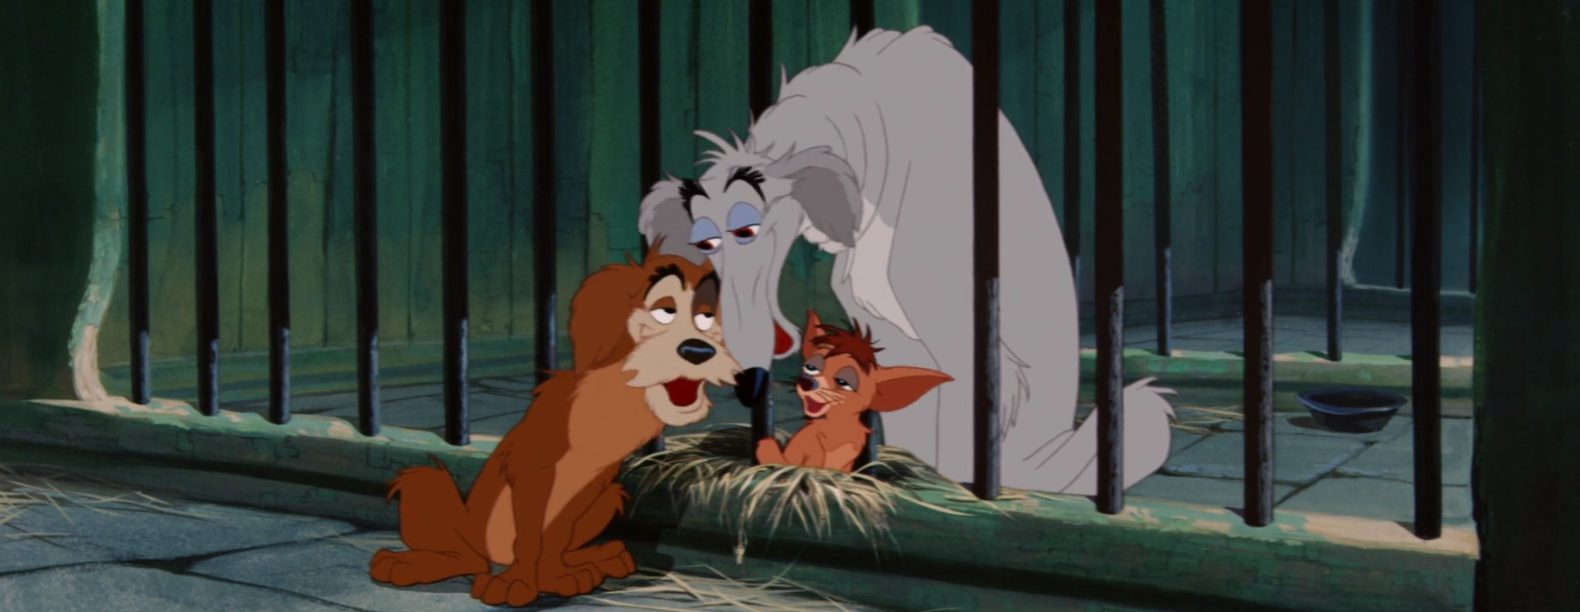 Lady and the Tramp Movie Review